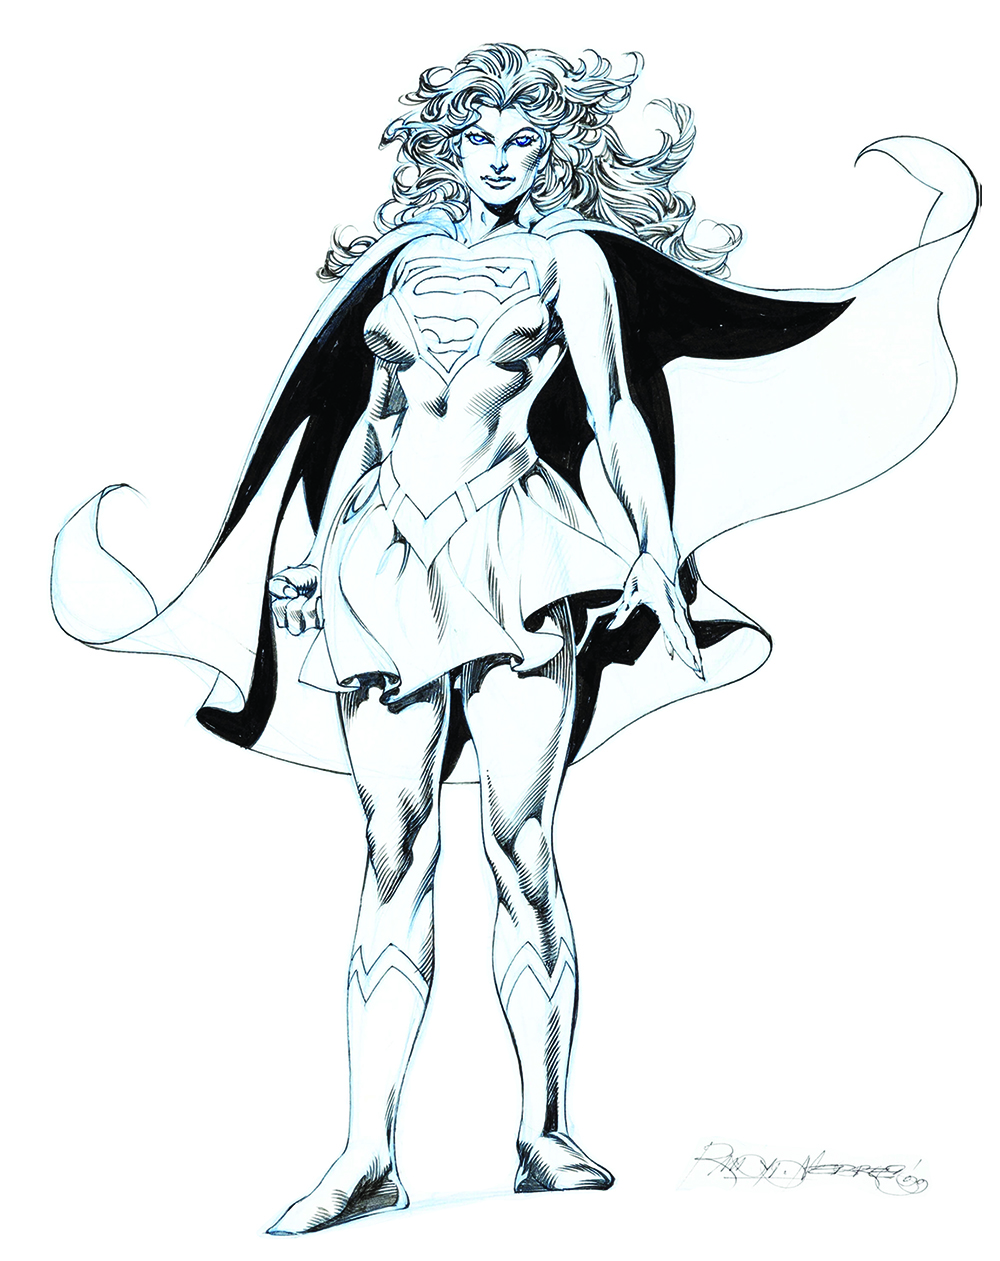 Image: Supergirl Specialty Art by Rudy Nebres